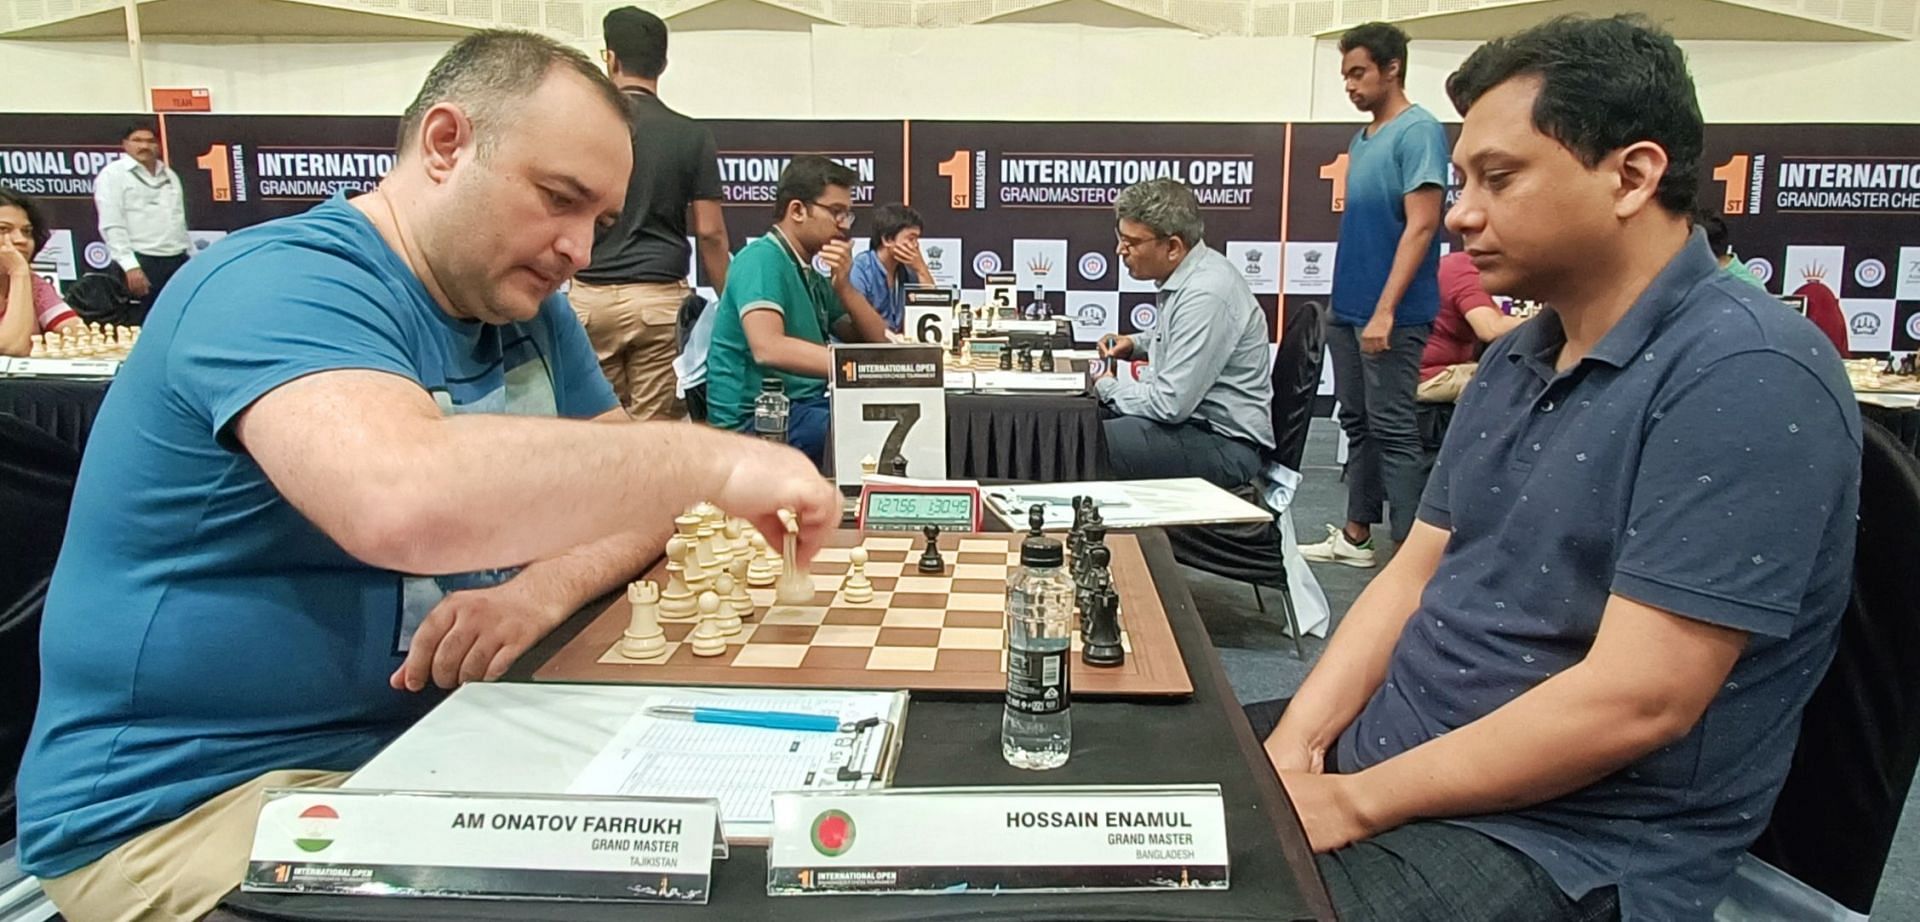 GM Farrukh Amonatov (L) playing against GM Enamul Hossain in the fifth round in Pune on Friday. (Pic credit: AICF)